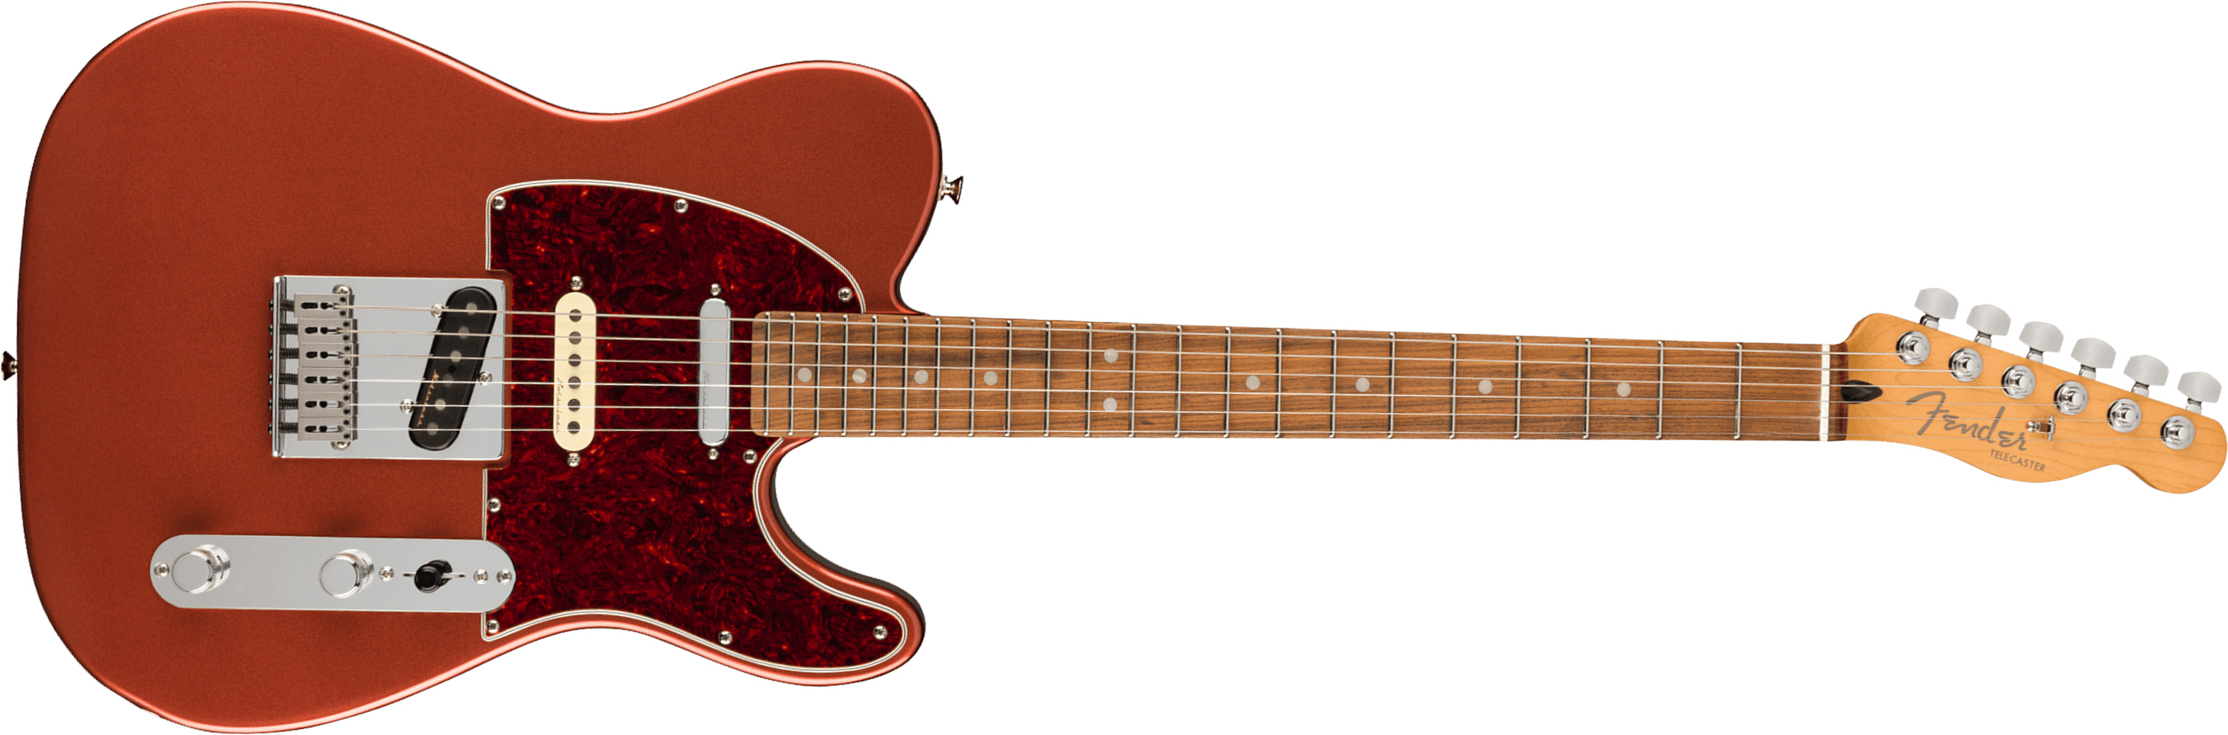 Fender Tele Player Plus Nashville Mex 3s Ht Pf - Aged Candy Apple Red - E-Gitarre in Teleform - Main picture